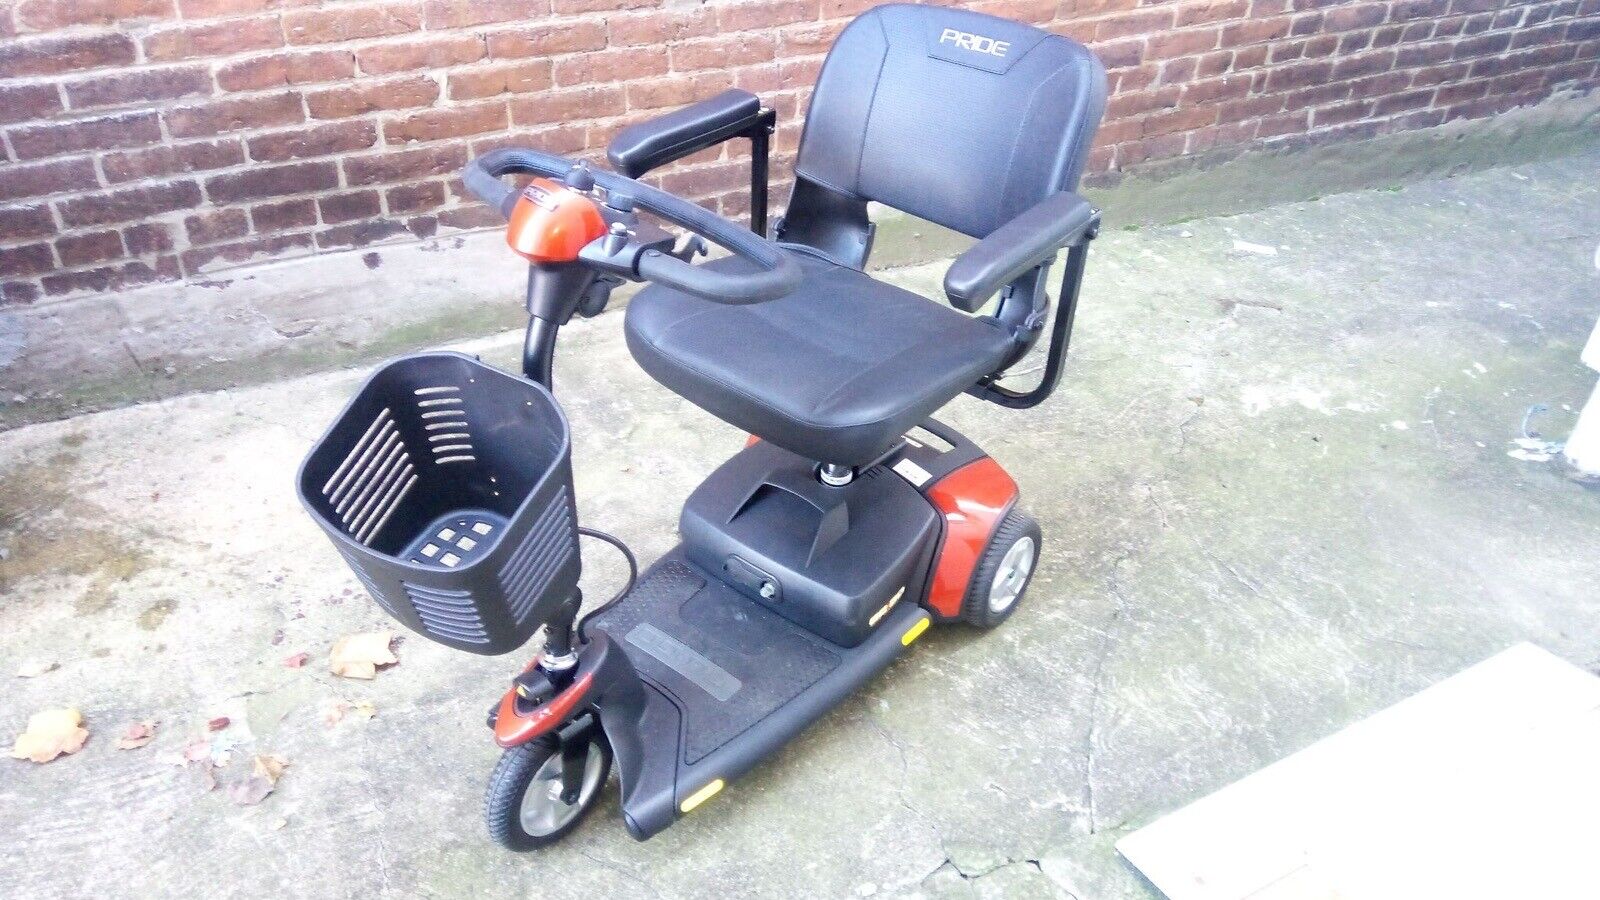 Go-Go Elite Traveller Mobility Scooter by Pride 3-Wheel - 18AH Battery